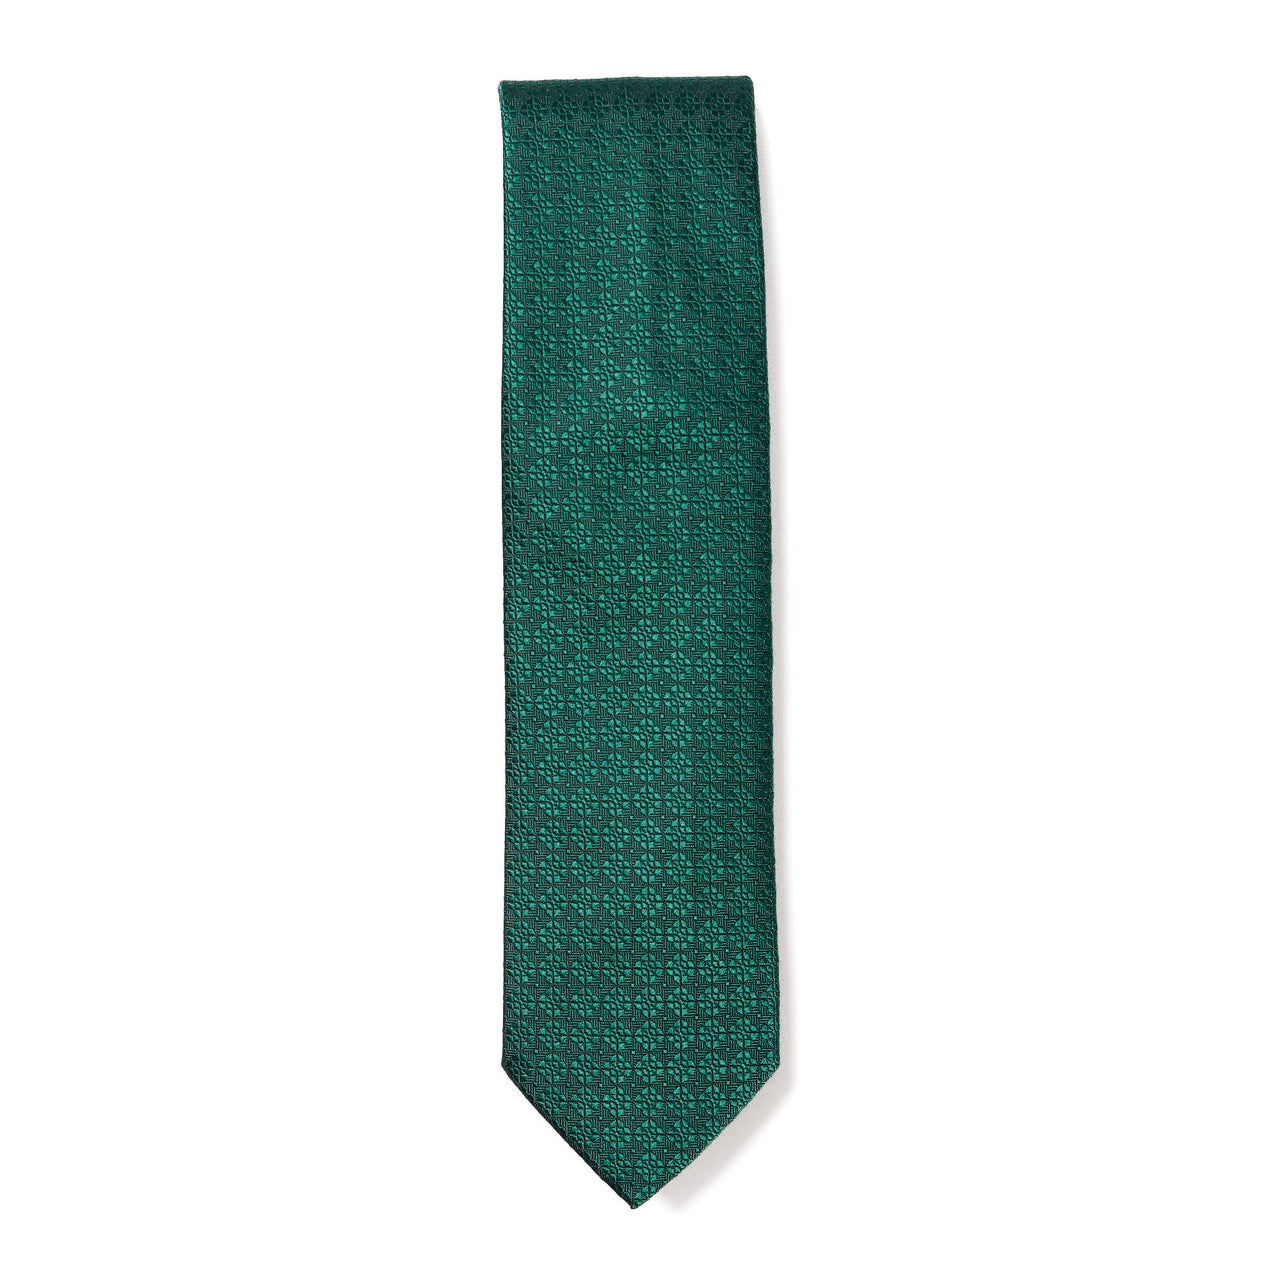 HENRY SARTORIAL X CANTINI Woven Textured Tie EMERALD GREEN